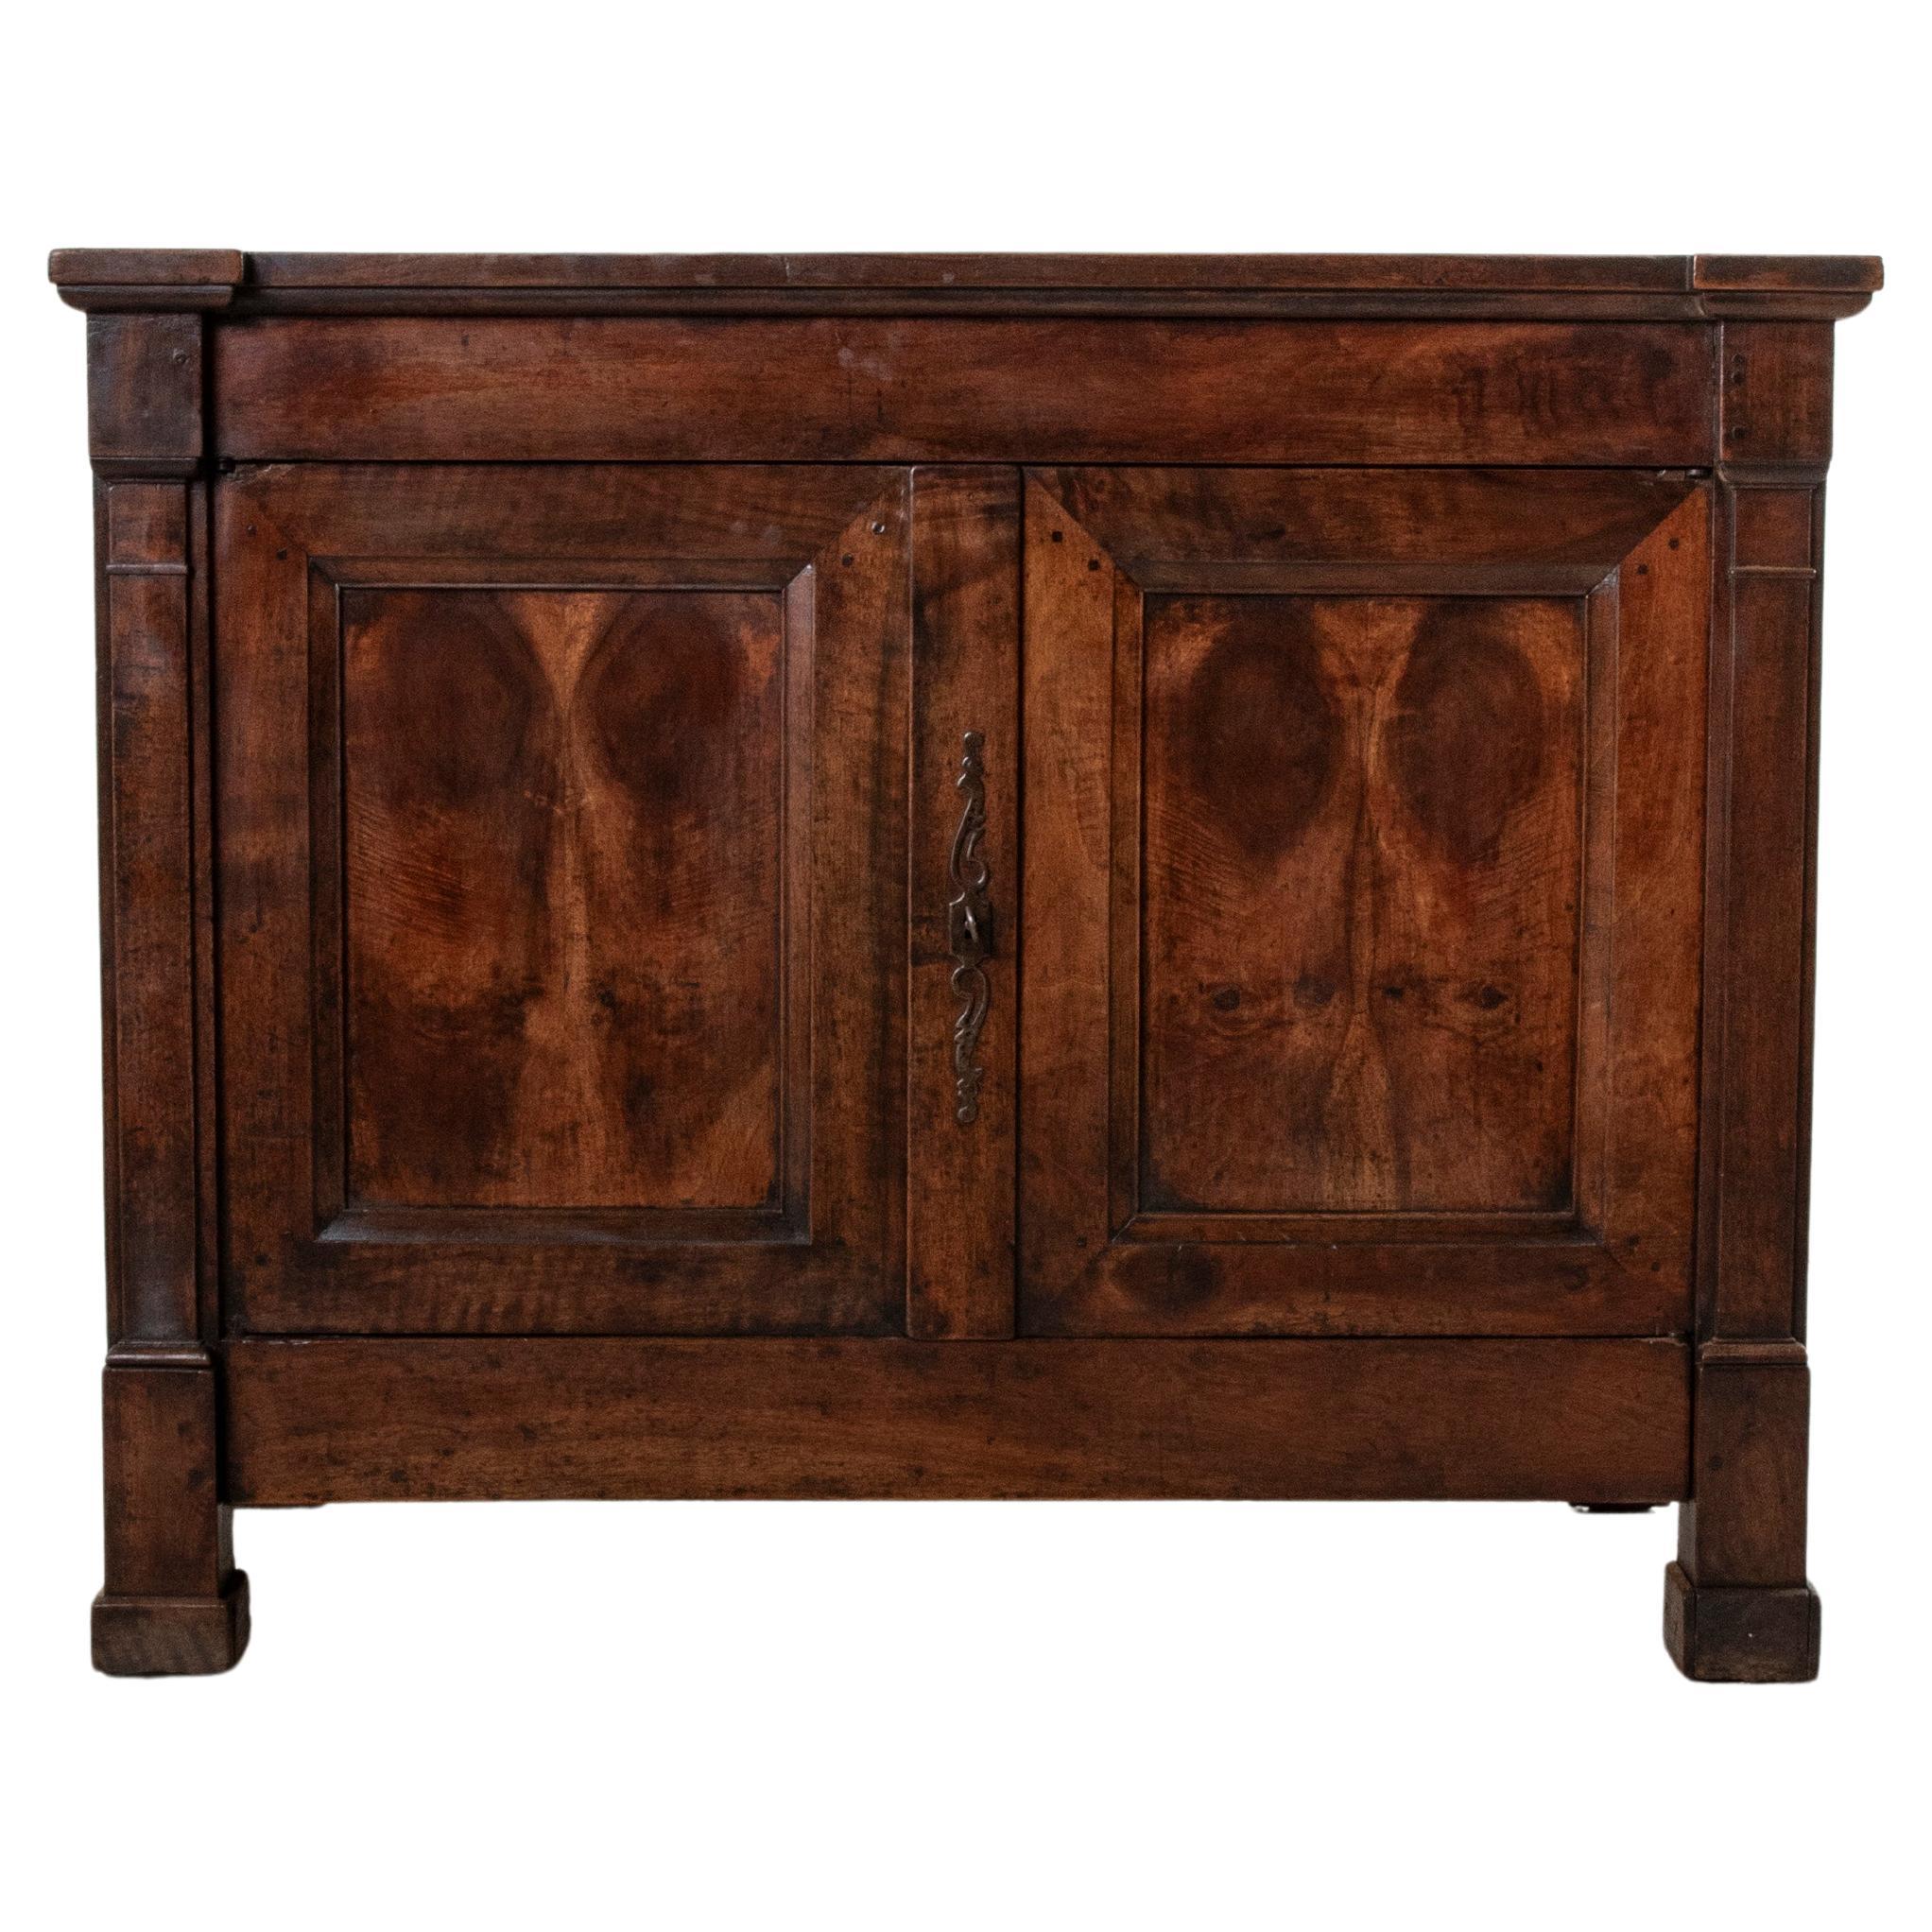 Early 19th Century French Restauration Period Book Matched Walnut Buffet For Sale